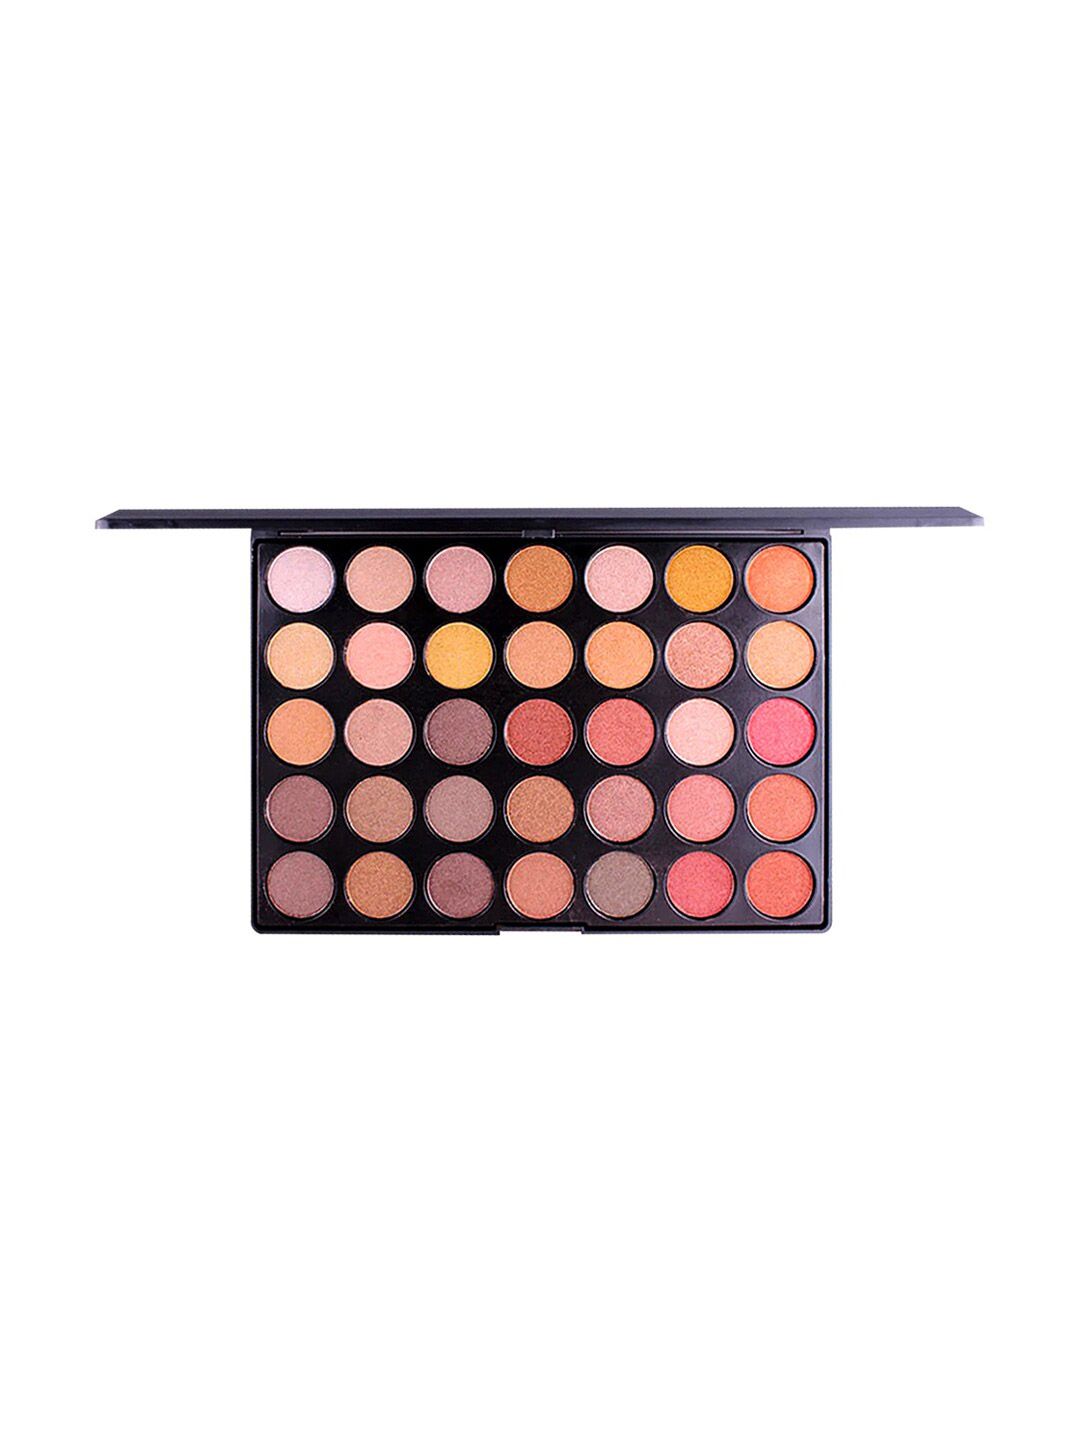 MISS ROSE 35 Color Matte Professional Eyeshadow Palette 7001-81 NT1 Price in India